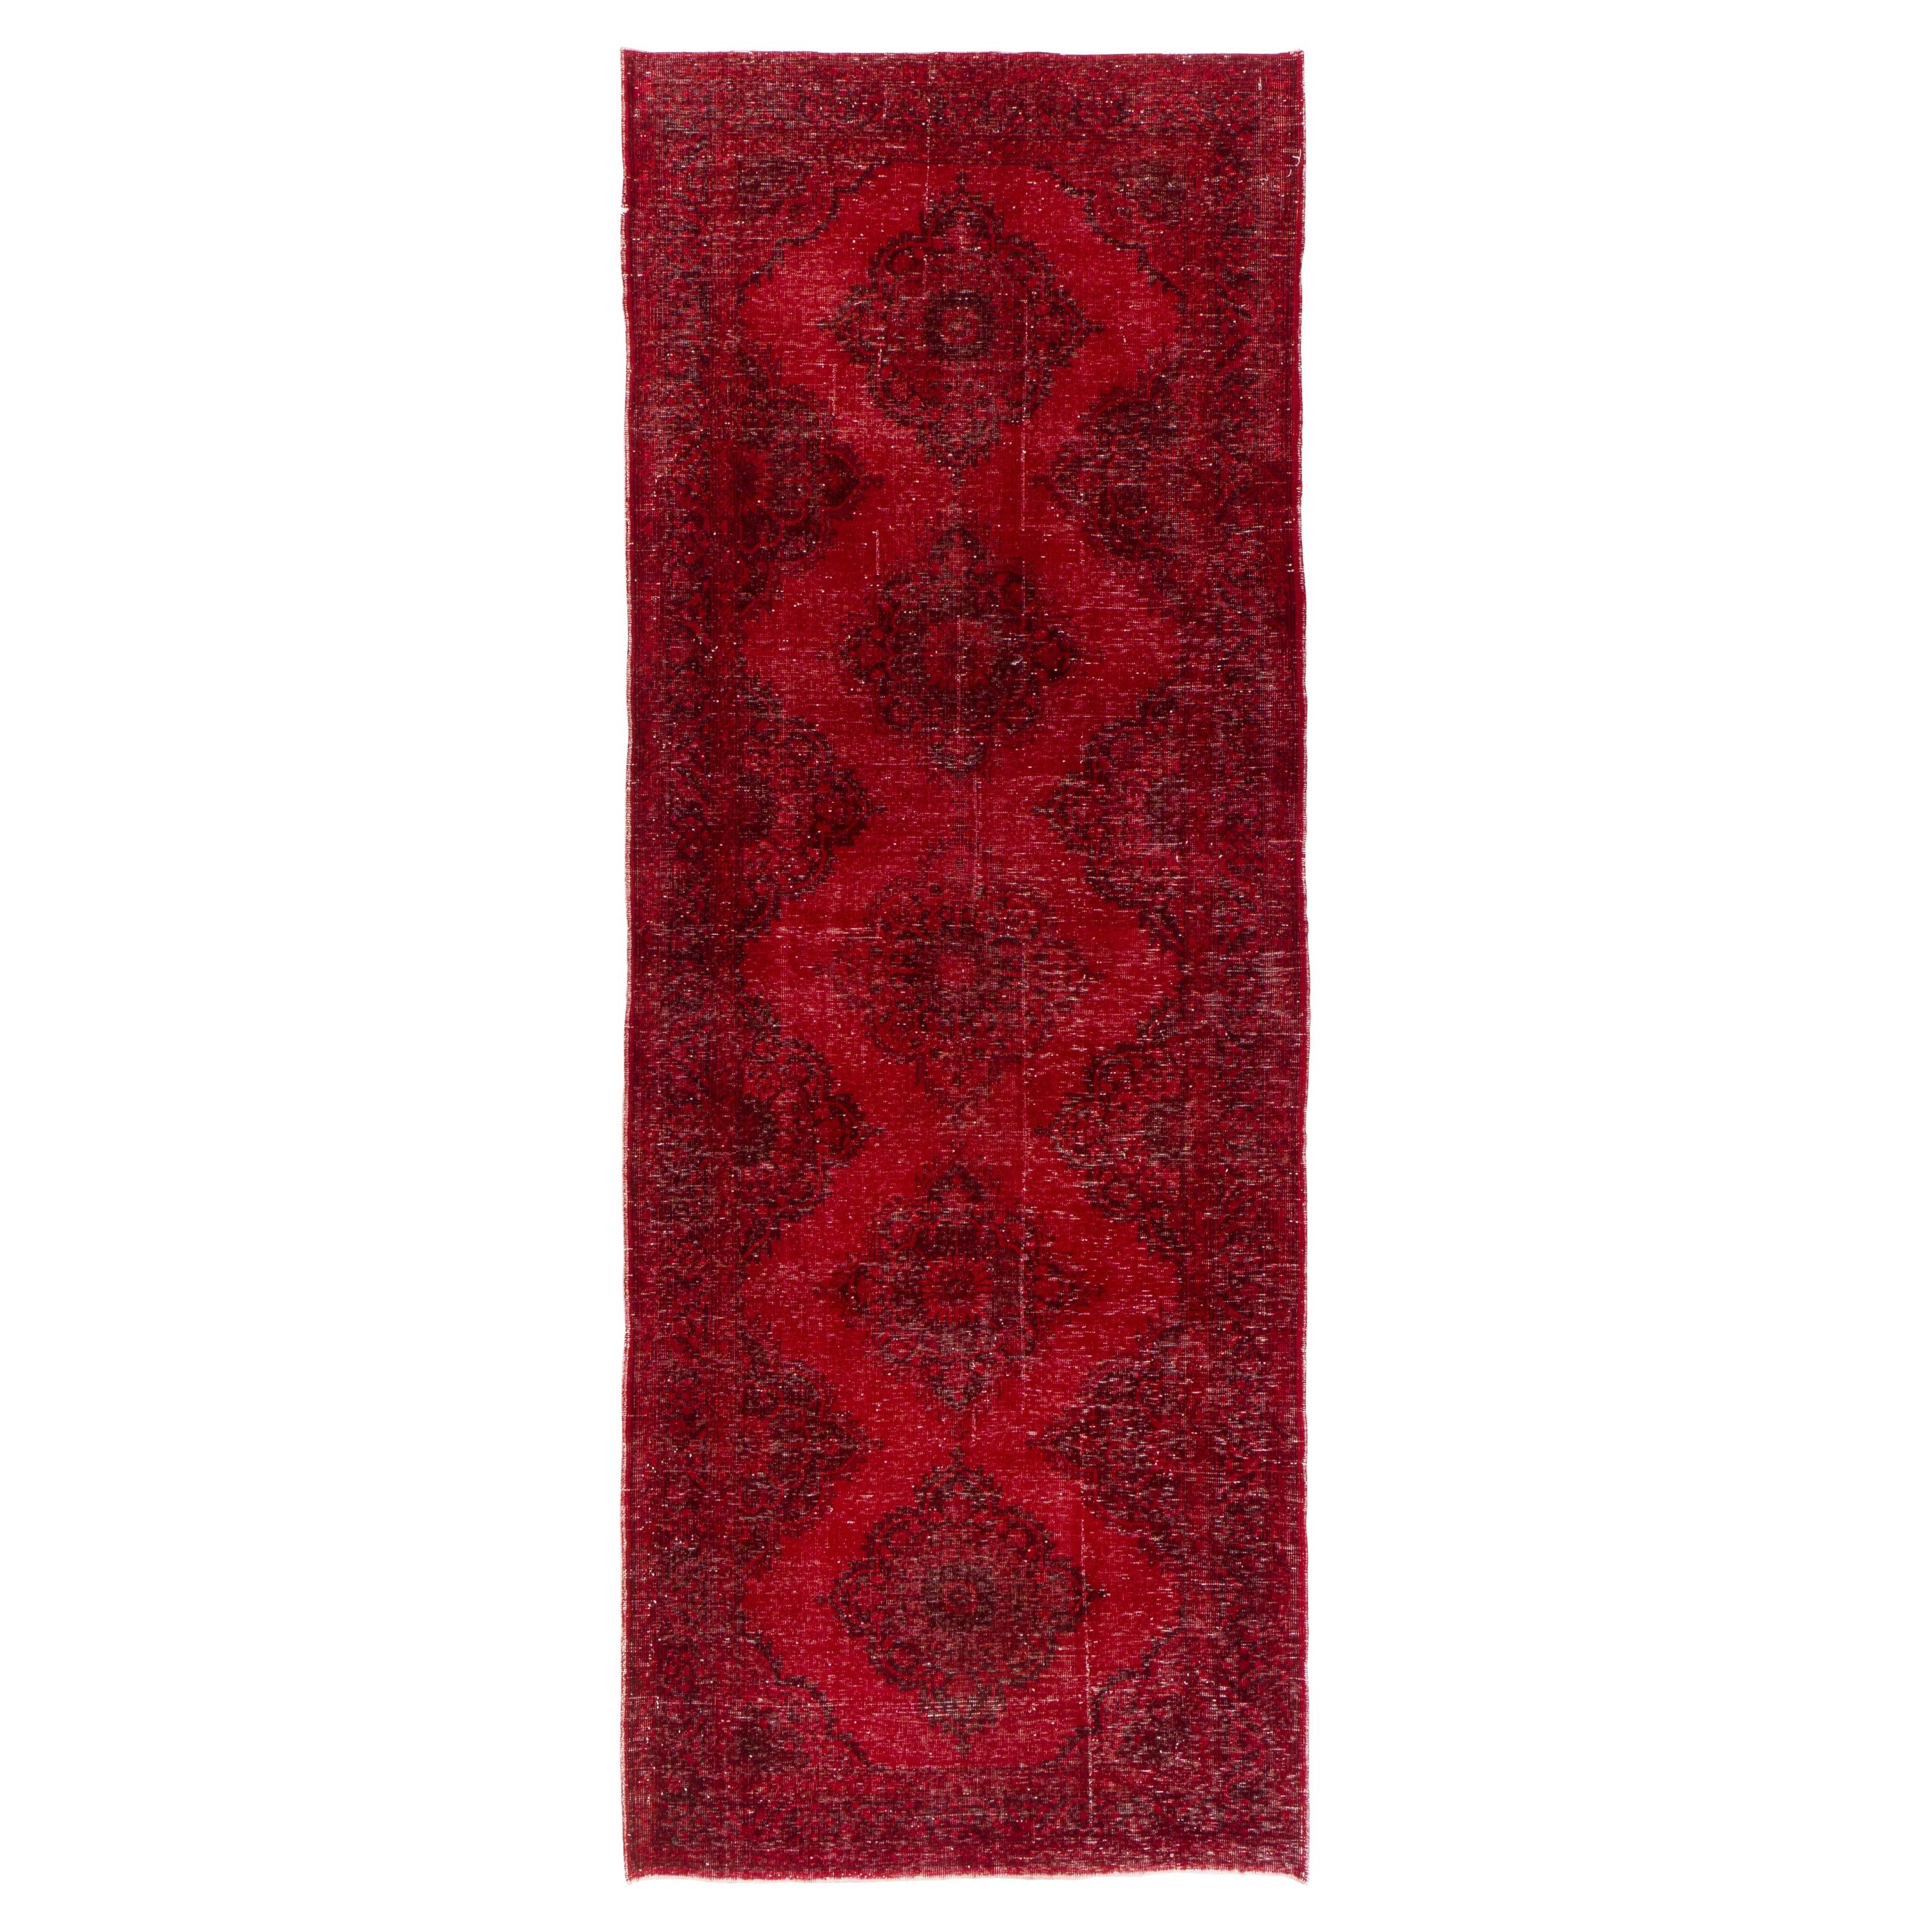 4.7x13 Ft Hand-Knotted Vintage Konya Sille Runner Rug Over-Dyed in Red Color For Sale